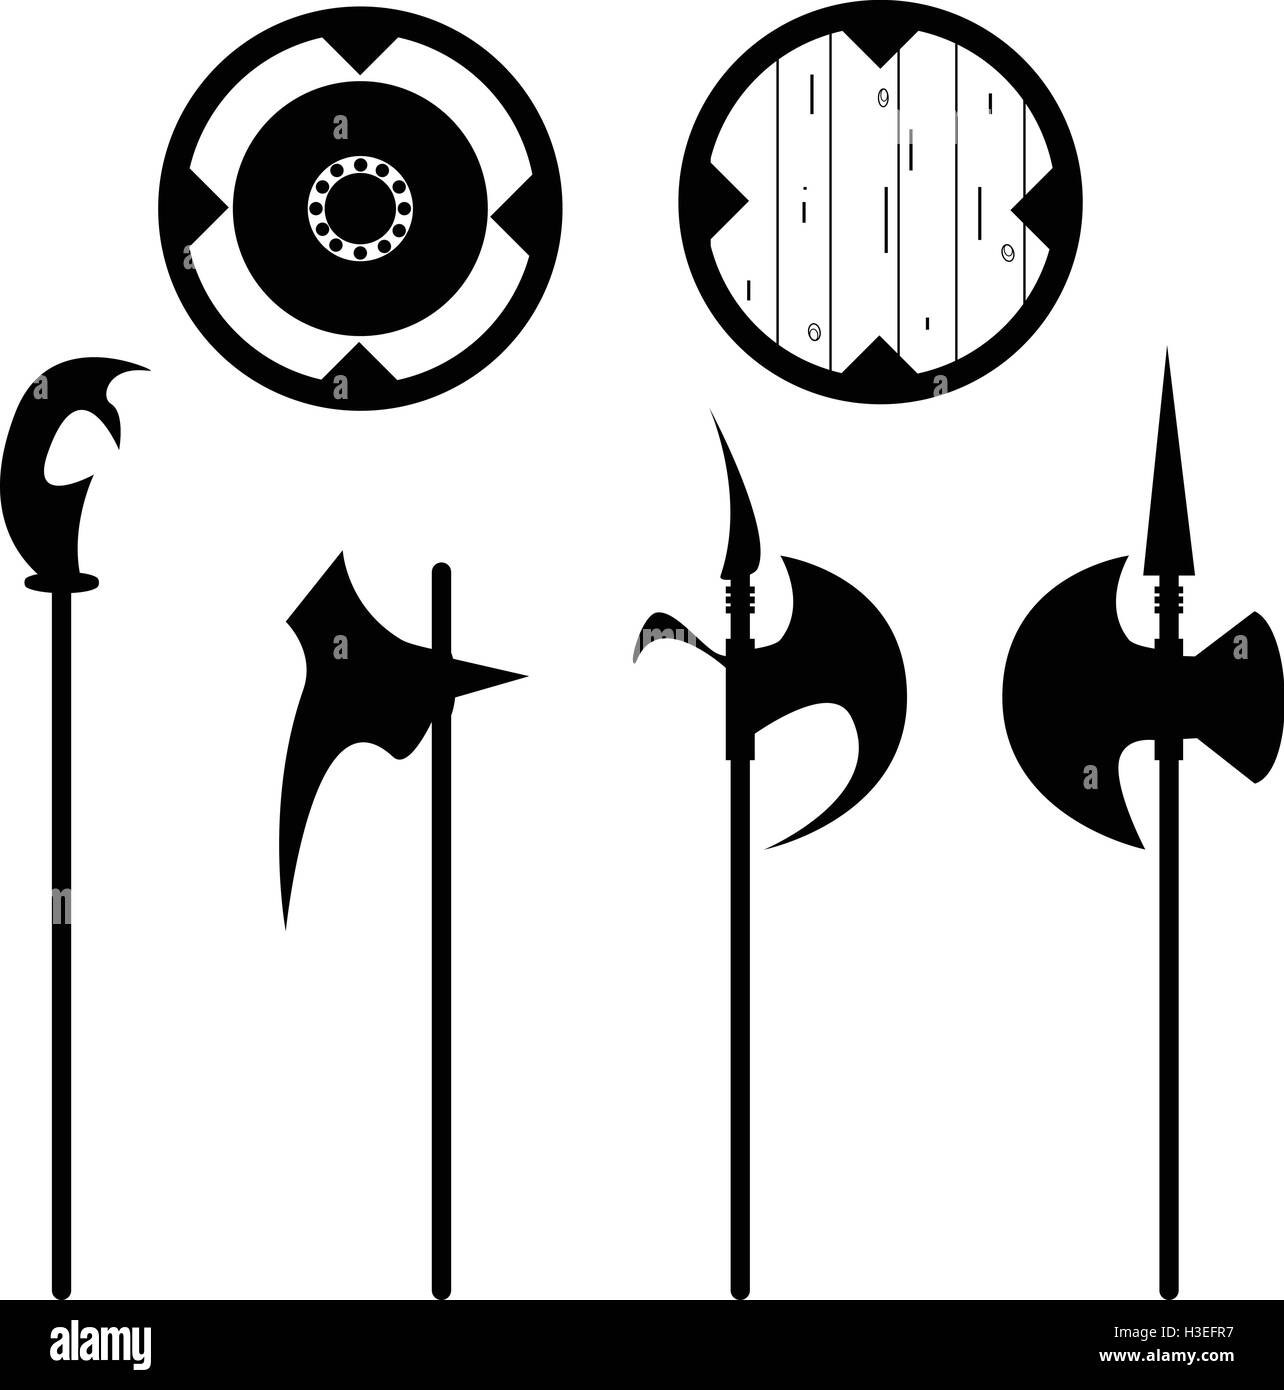 Mace medieval weapon Stock Vector Images - Alamy